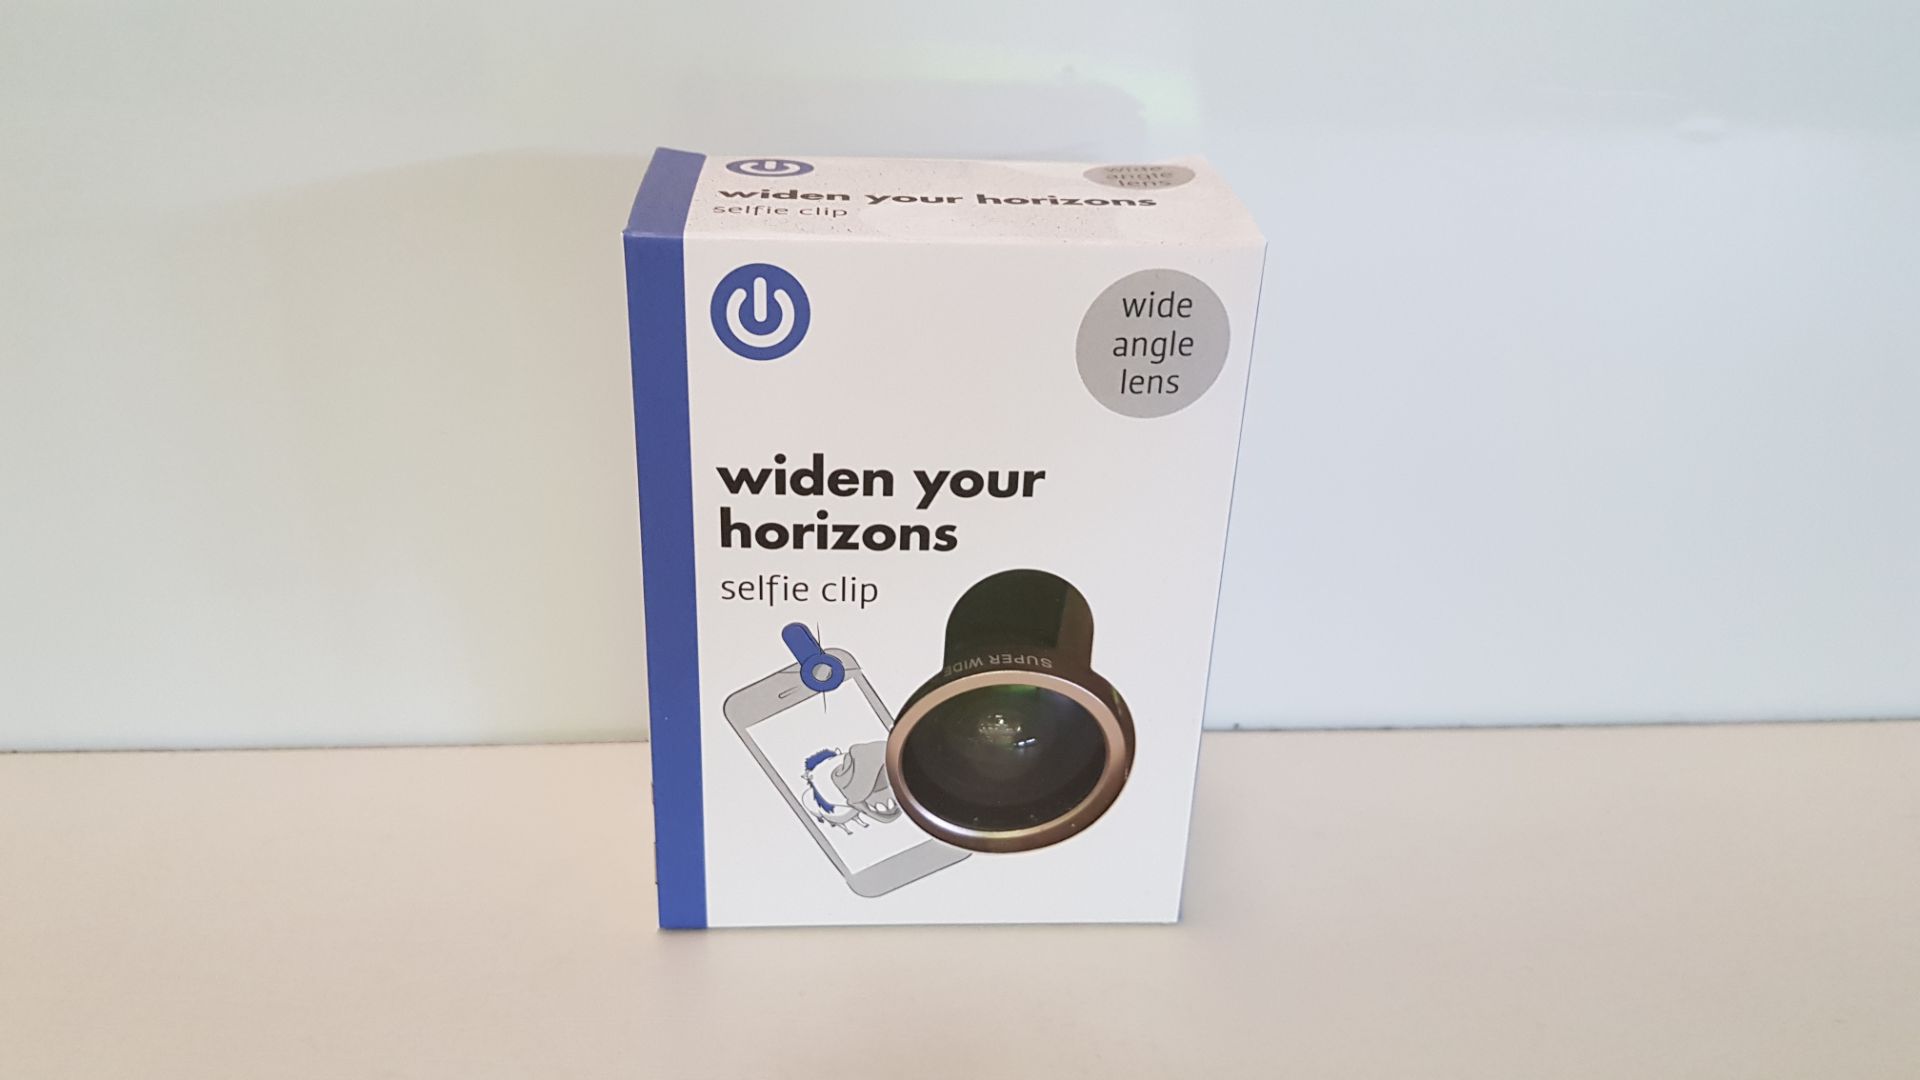 480 X BRAND NEW BOXED WIDEN YOUR HORIZONS SELFIE CLIP (WIDE ANGLE LENS) - IN 15 BOXES - Image 2 of 2